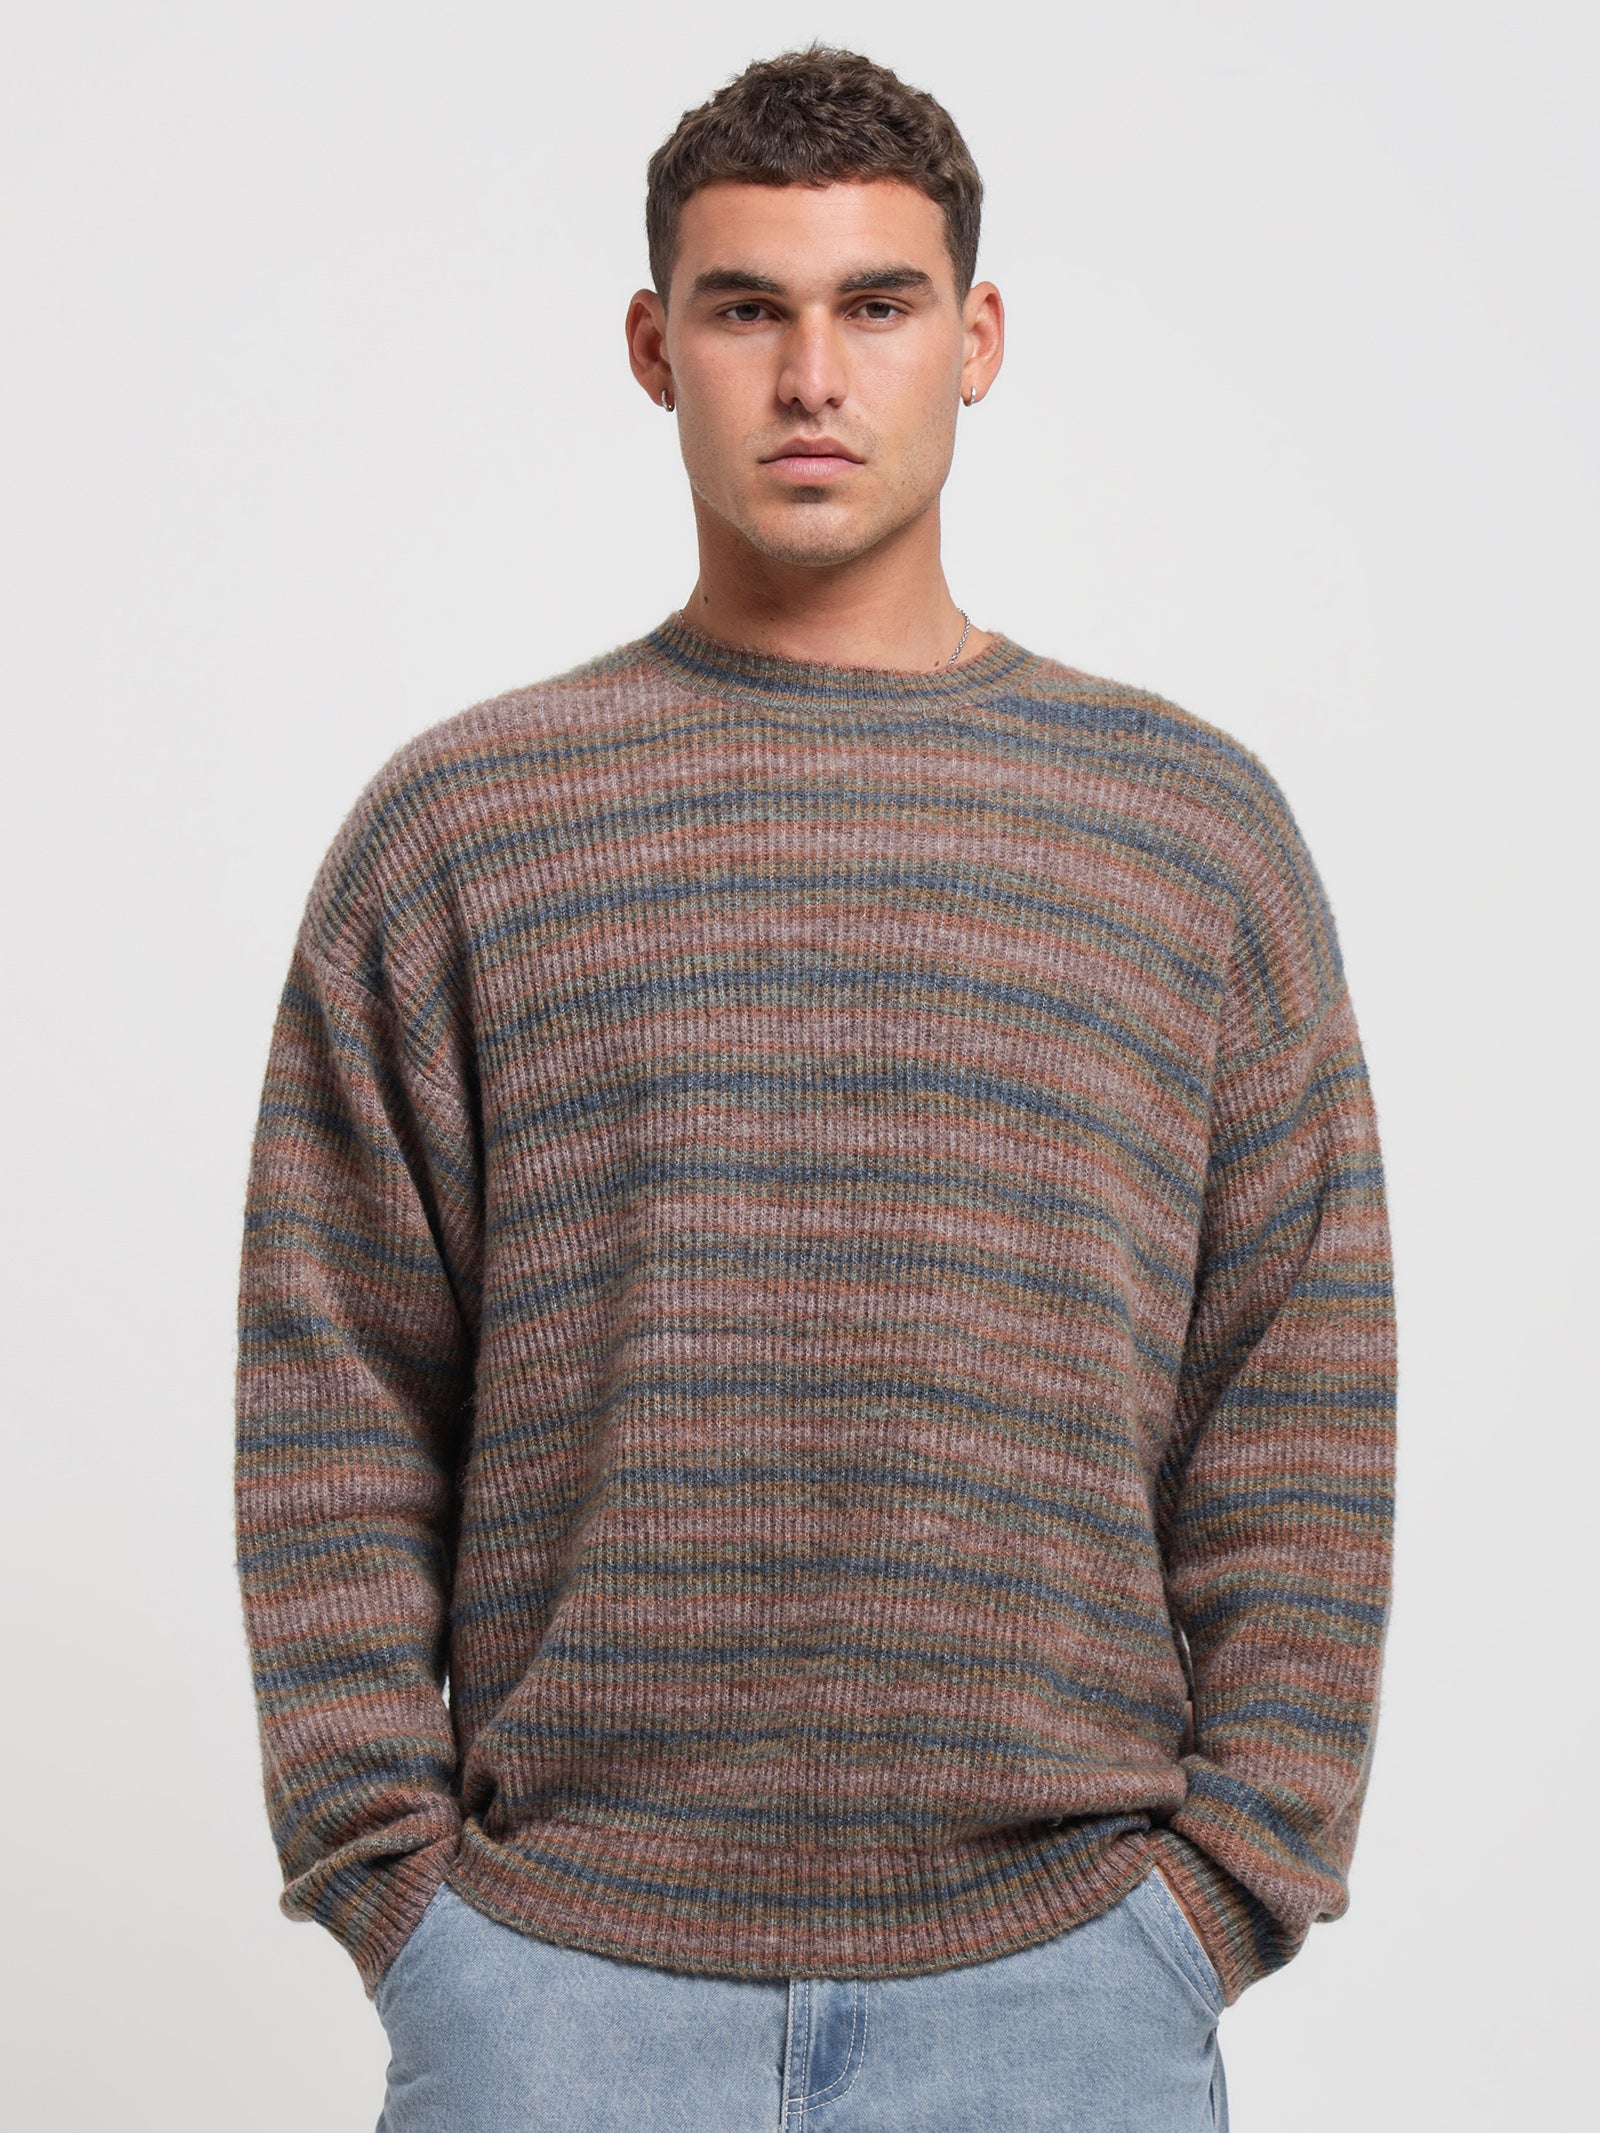 Rampage Knit Sweater in Bown & Blue Stripes - Glue Store